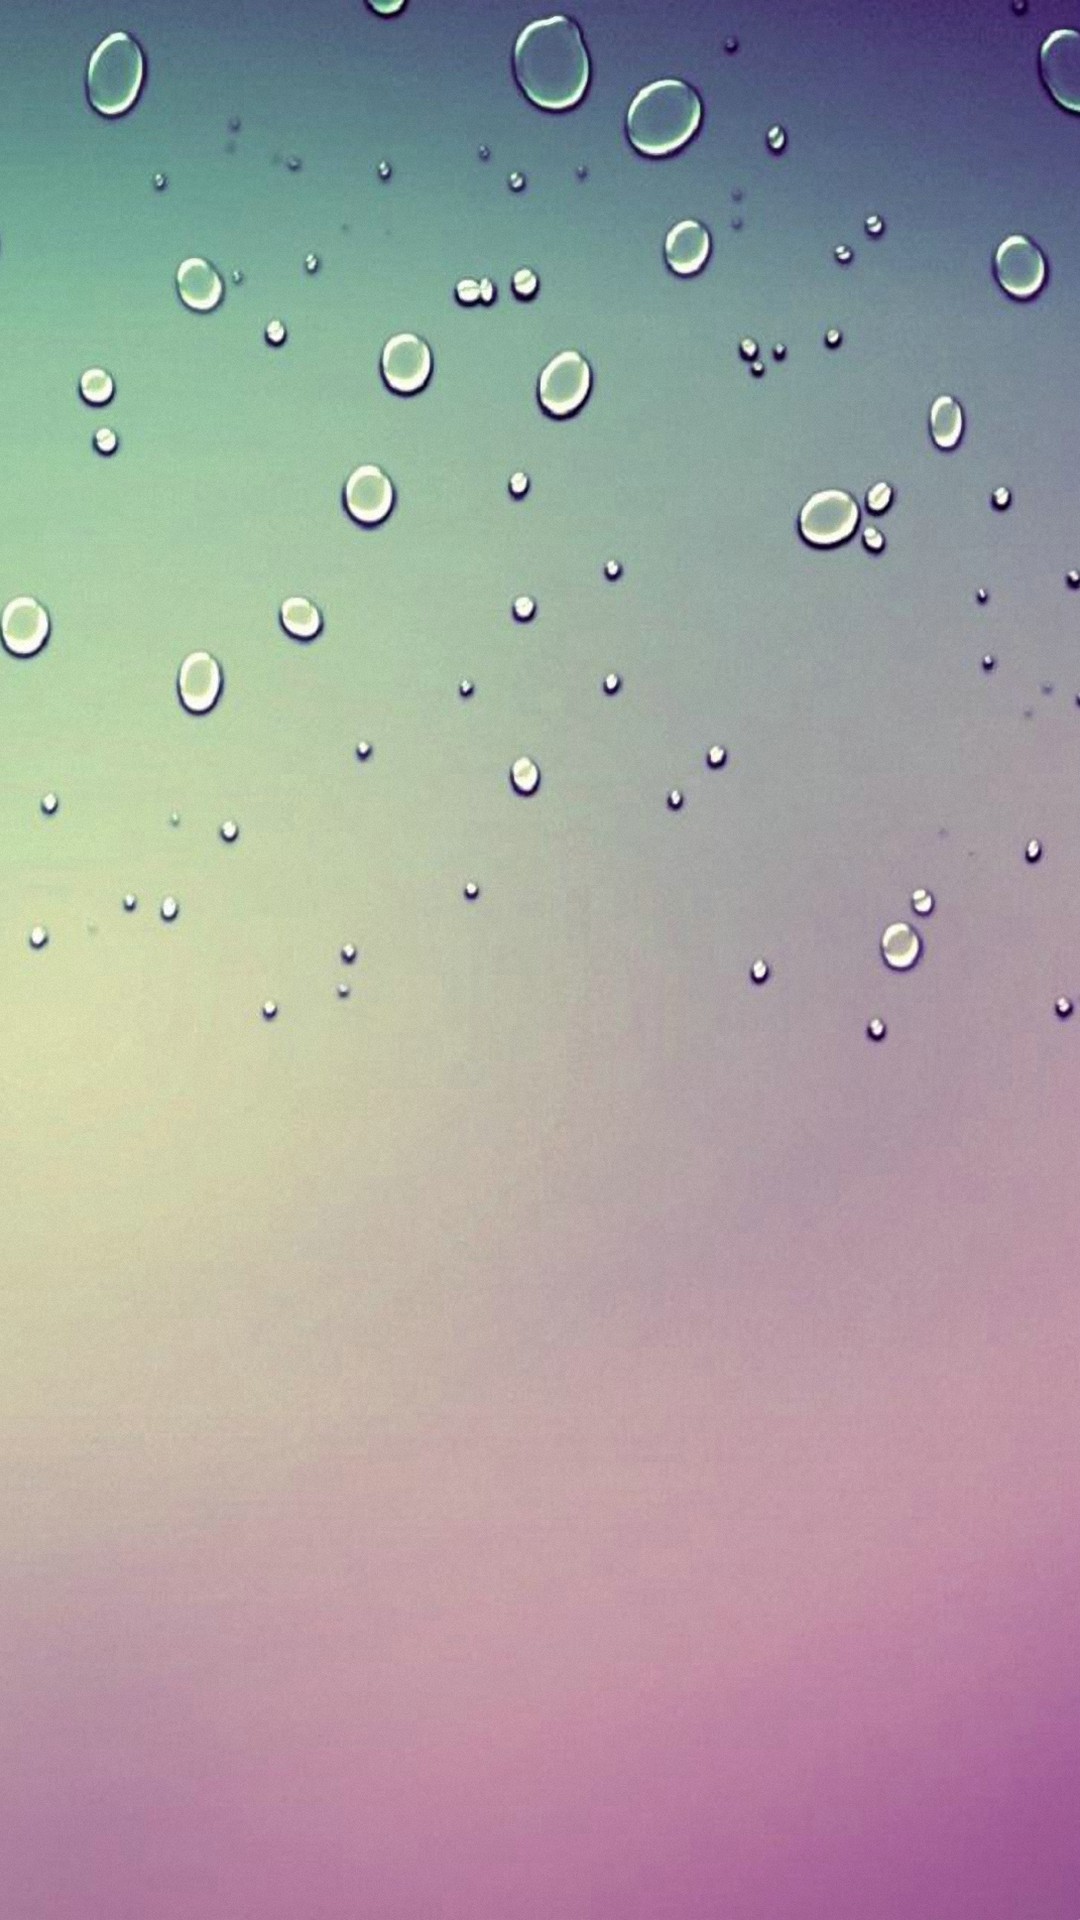 Rain Wallpaper Android - 2020 Android